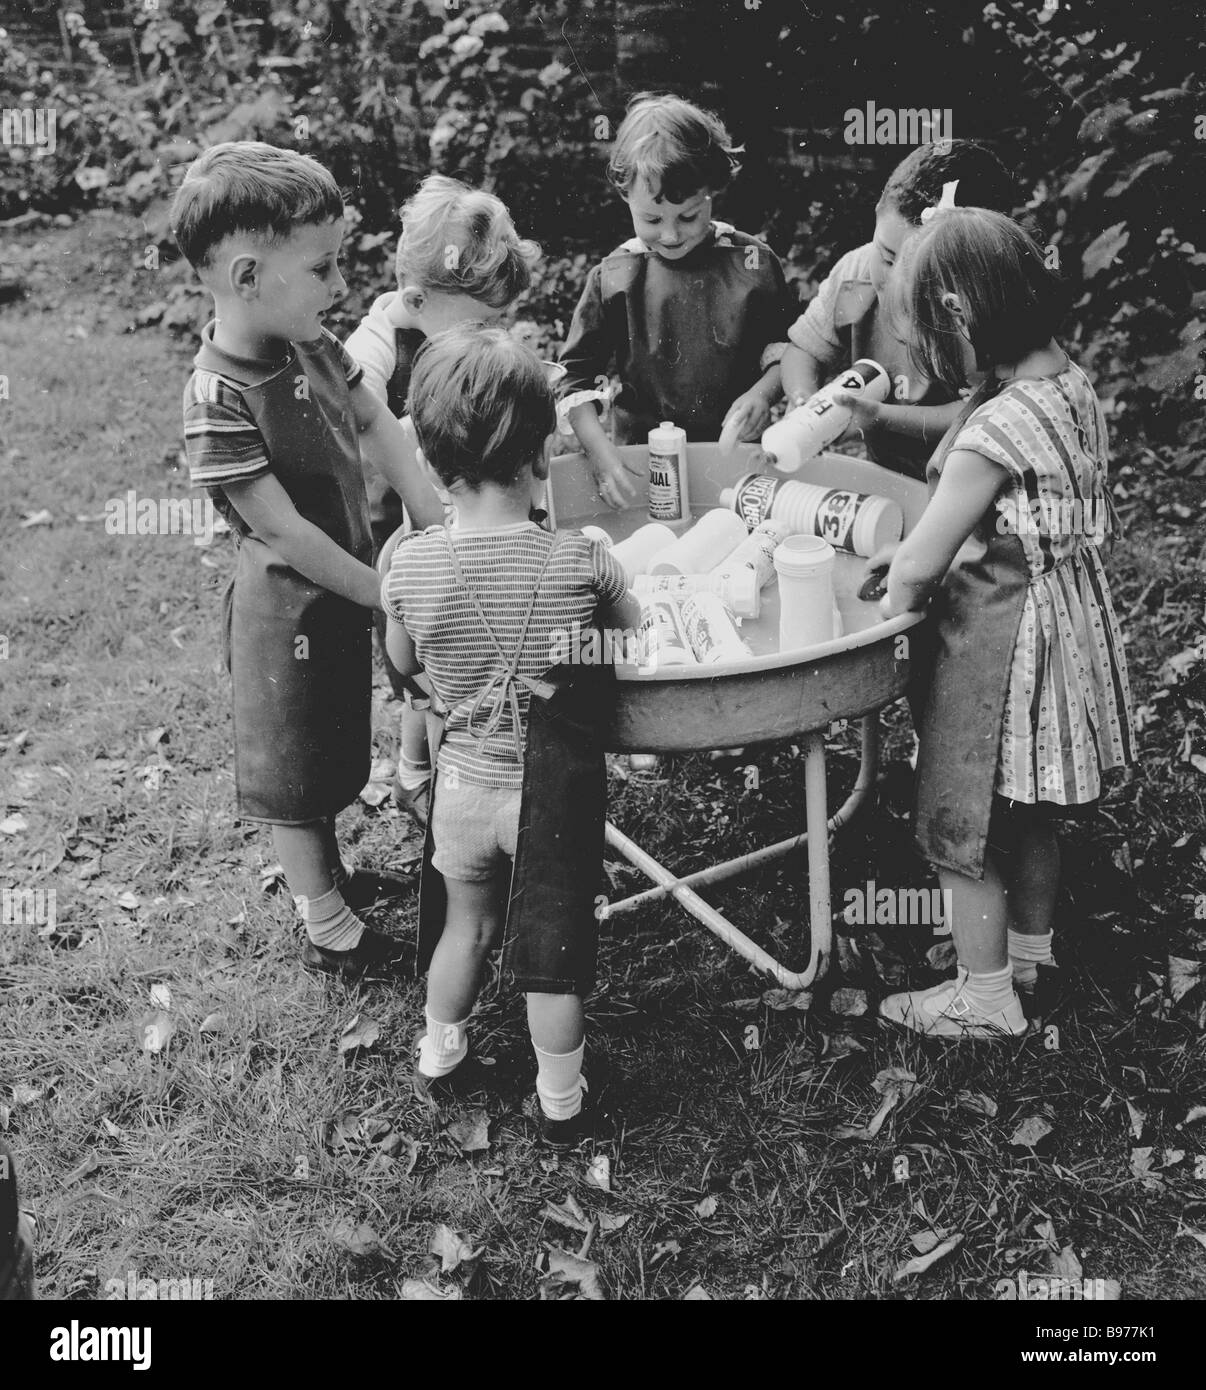 1950s, early learning, a group of young children playing with old washing-up liquid plastic bottles in a metal bowl outside in a garden, England, UK. Stock Photo